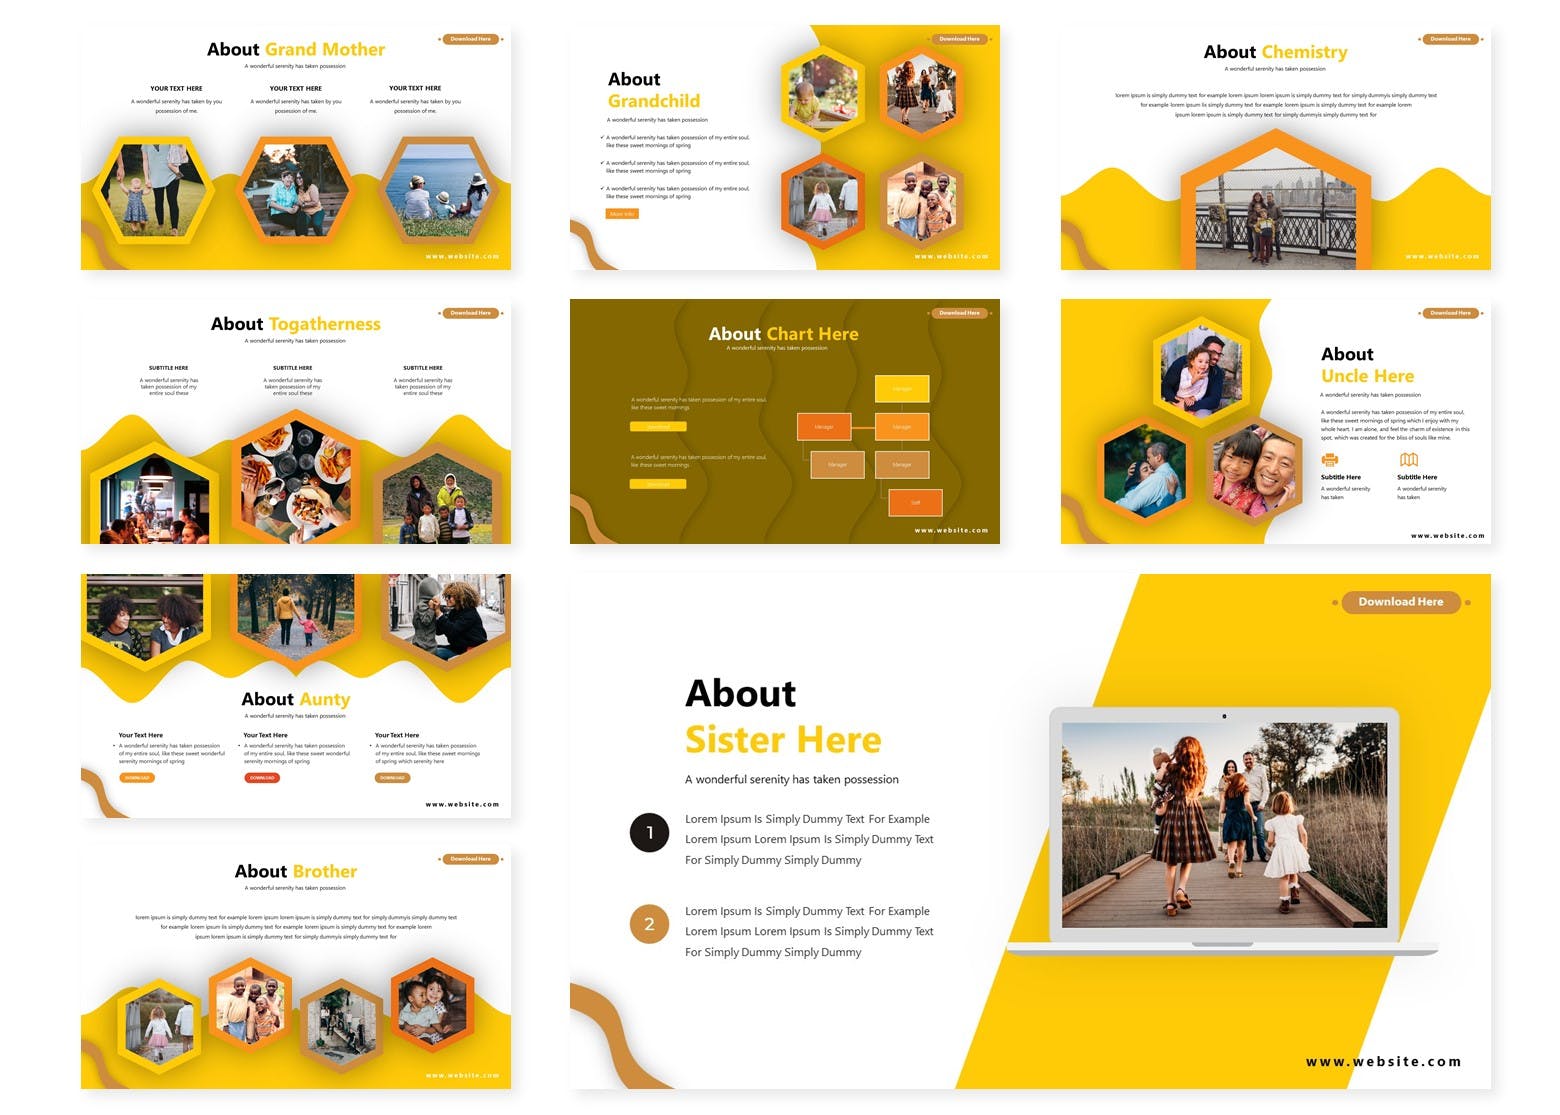 Create your business with this colorful design.